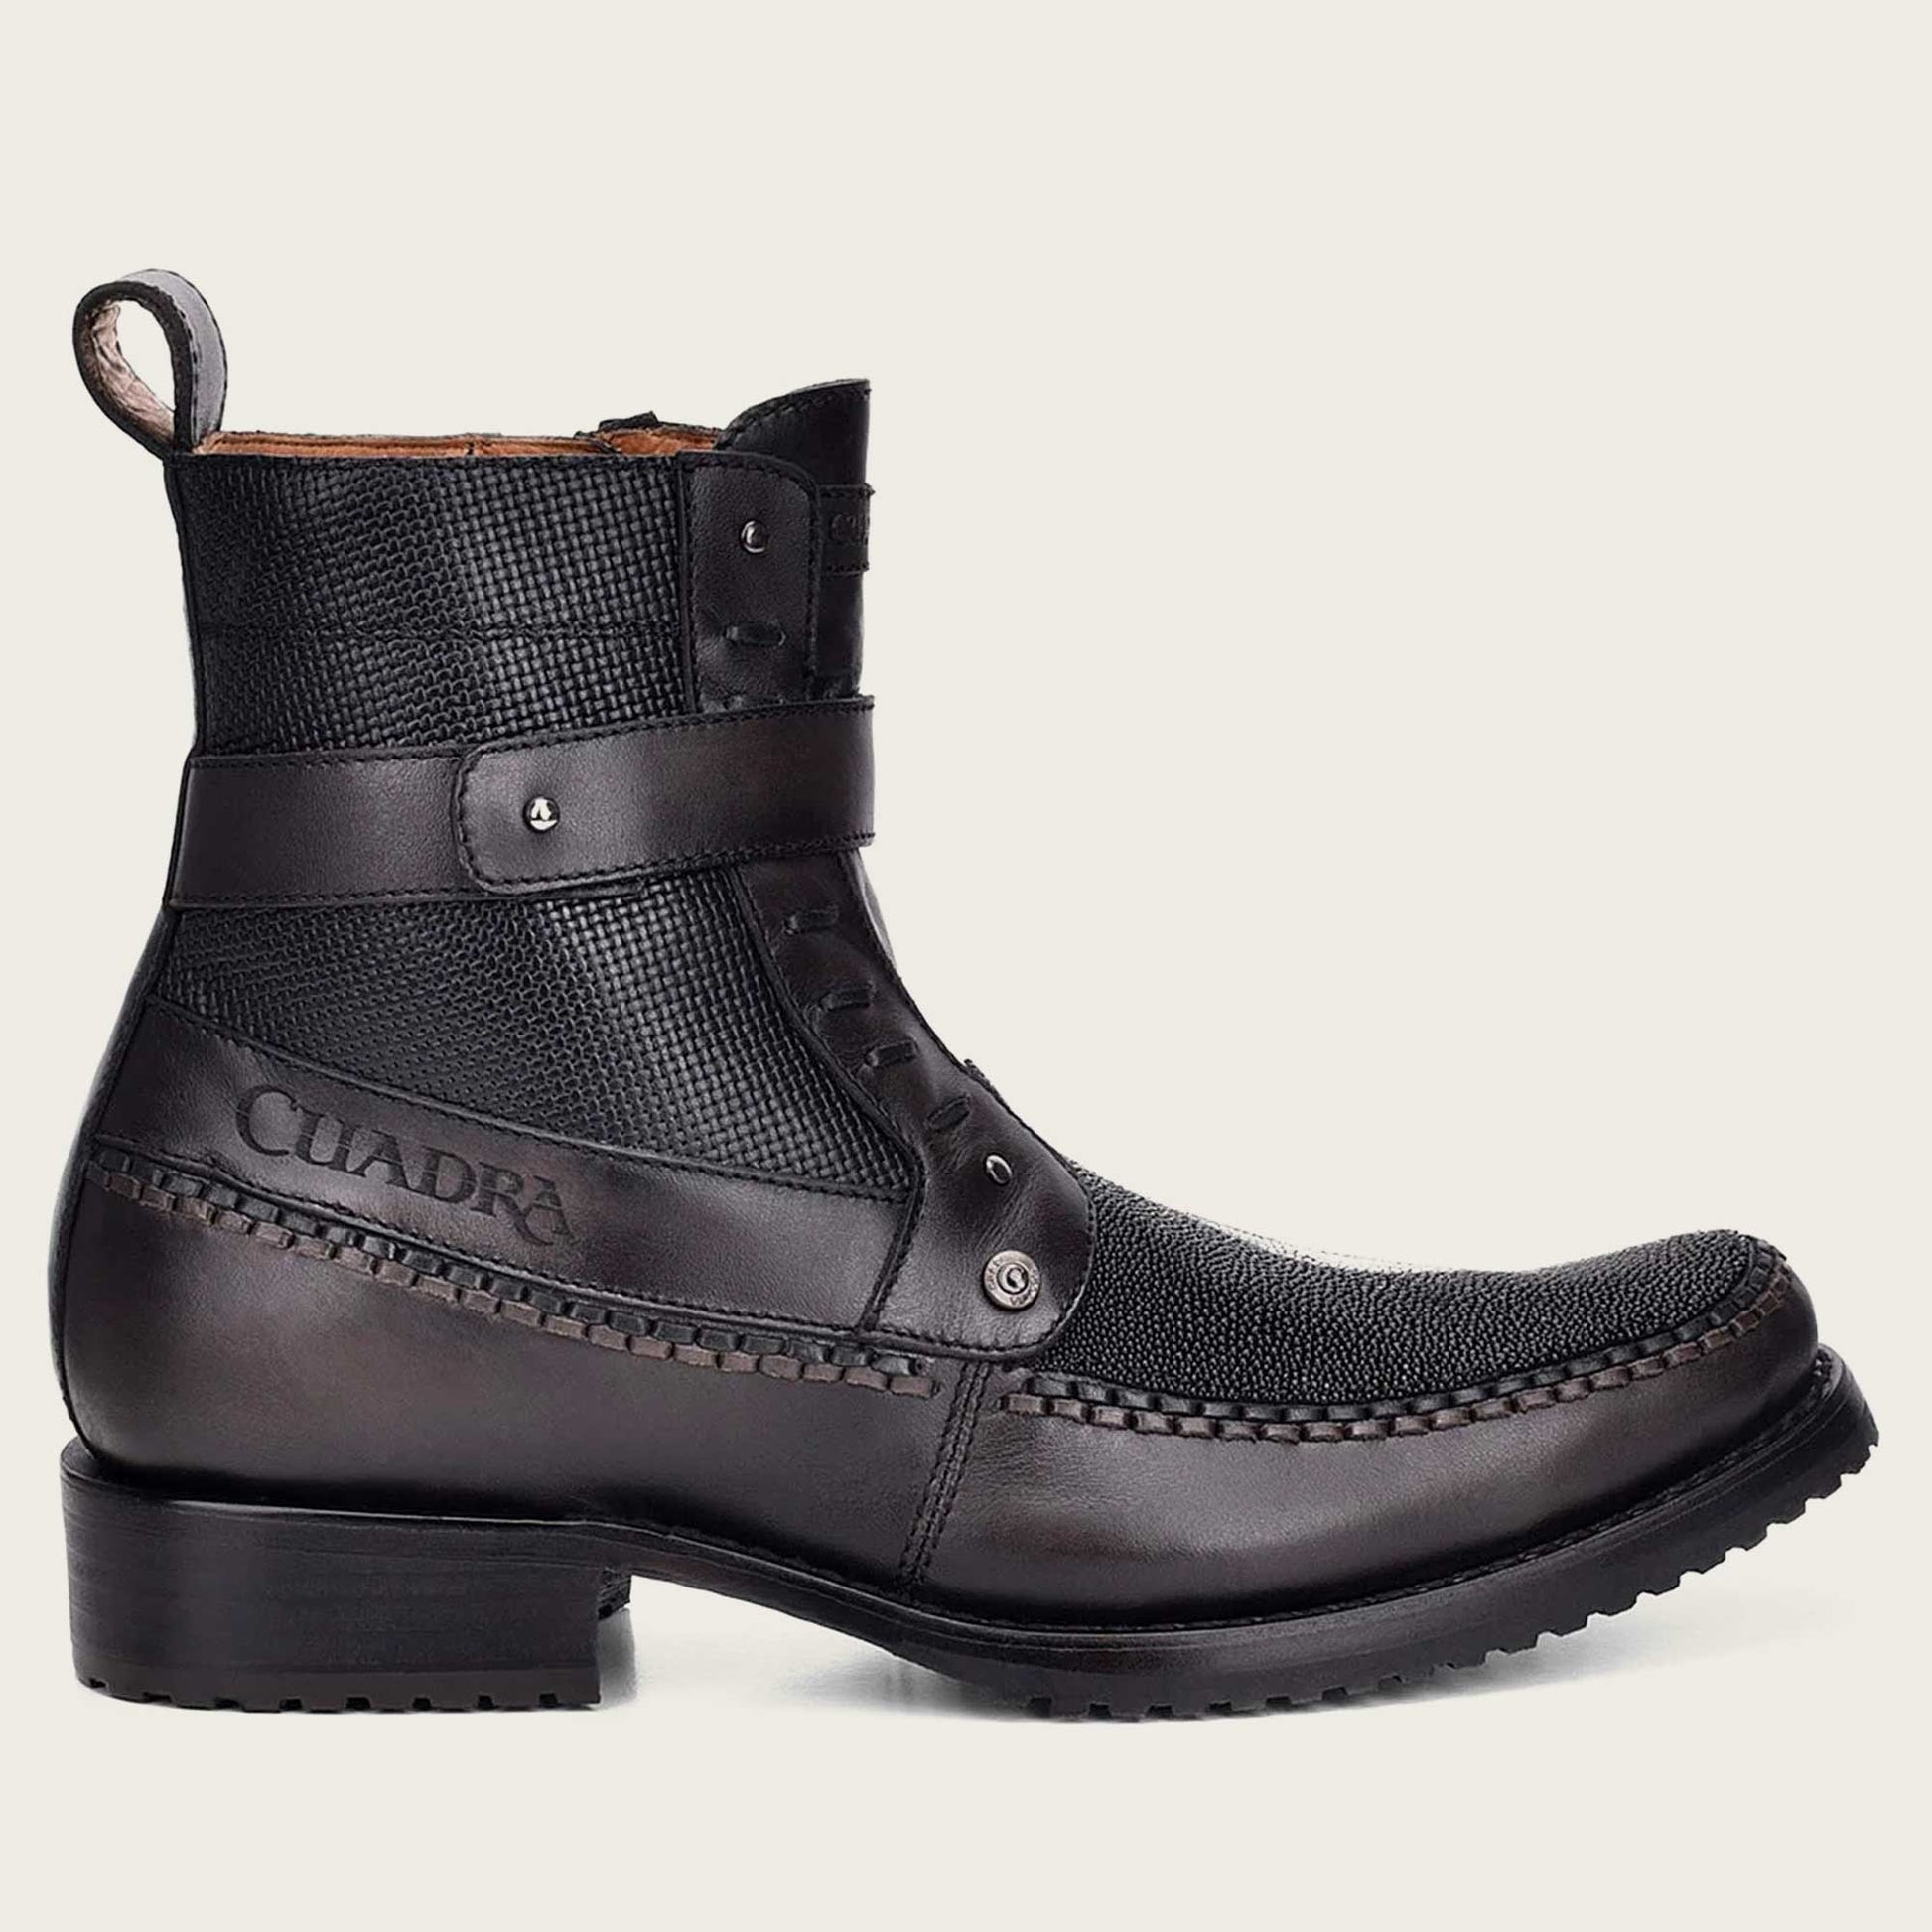 Step up your style with our handwoven black leather boot. Perfect for any occasion, these boots are a timeless addition to your wardrobe.